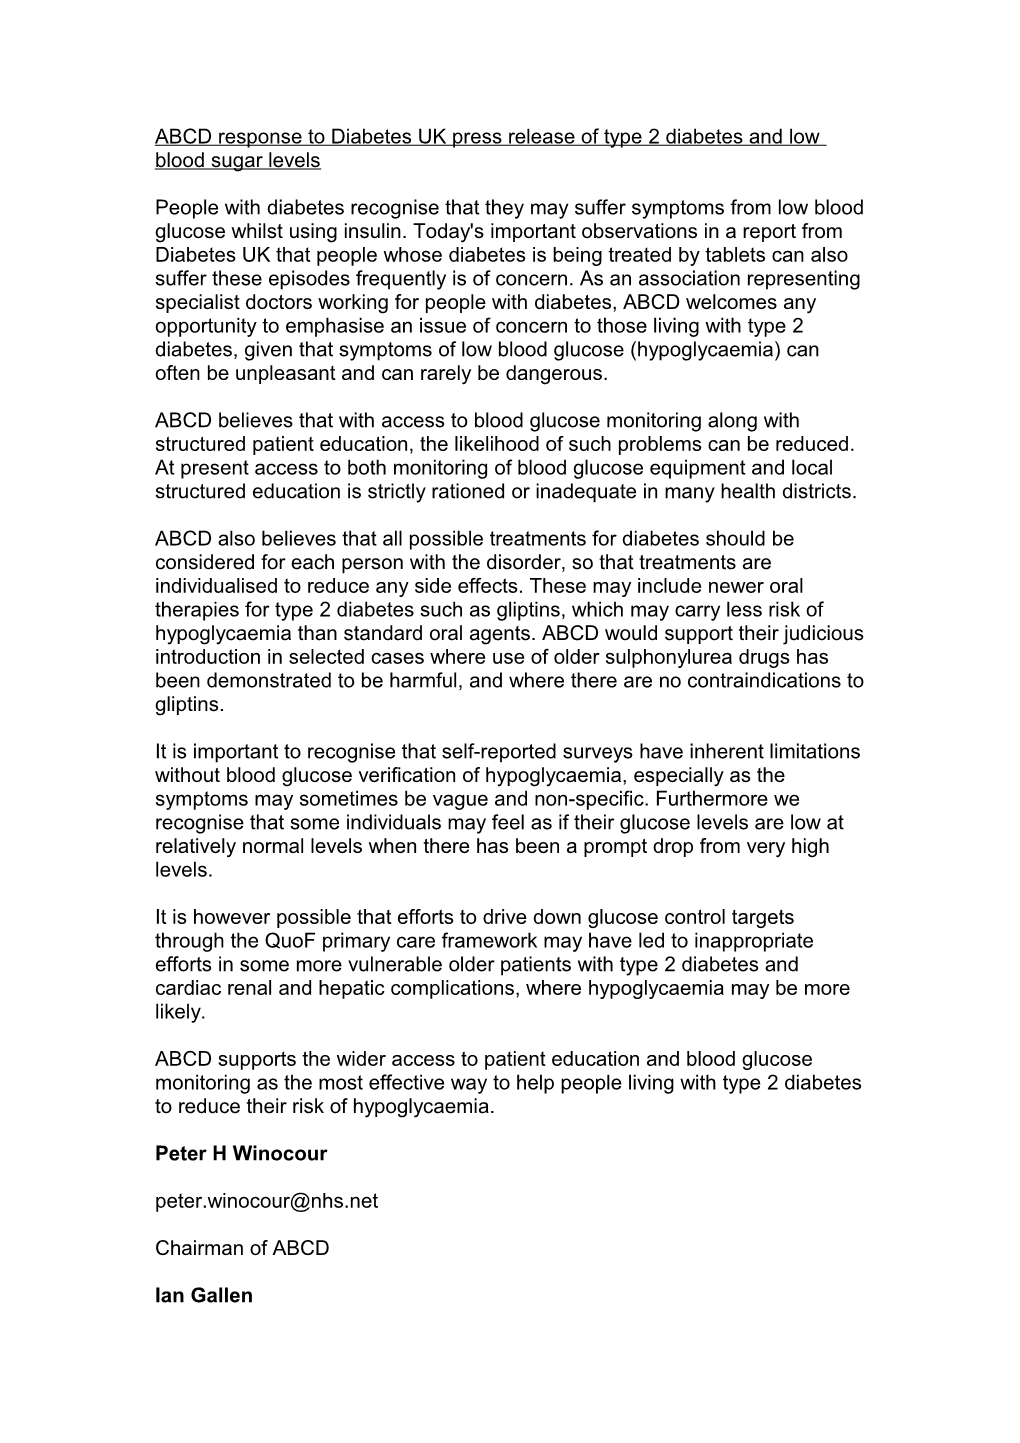 ABCD Response to Diabetes UK Press Release of Type 2 Diabetes and Low Blood Sugar Levels